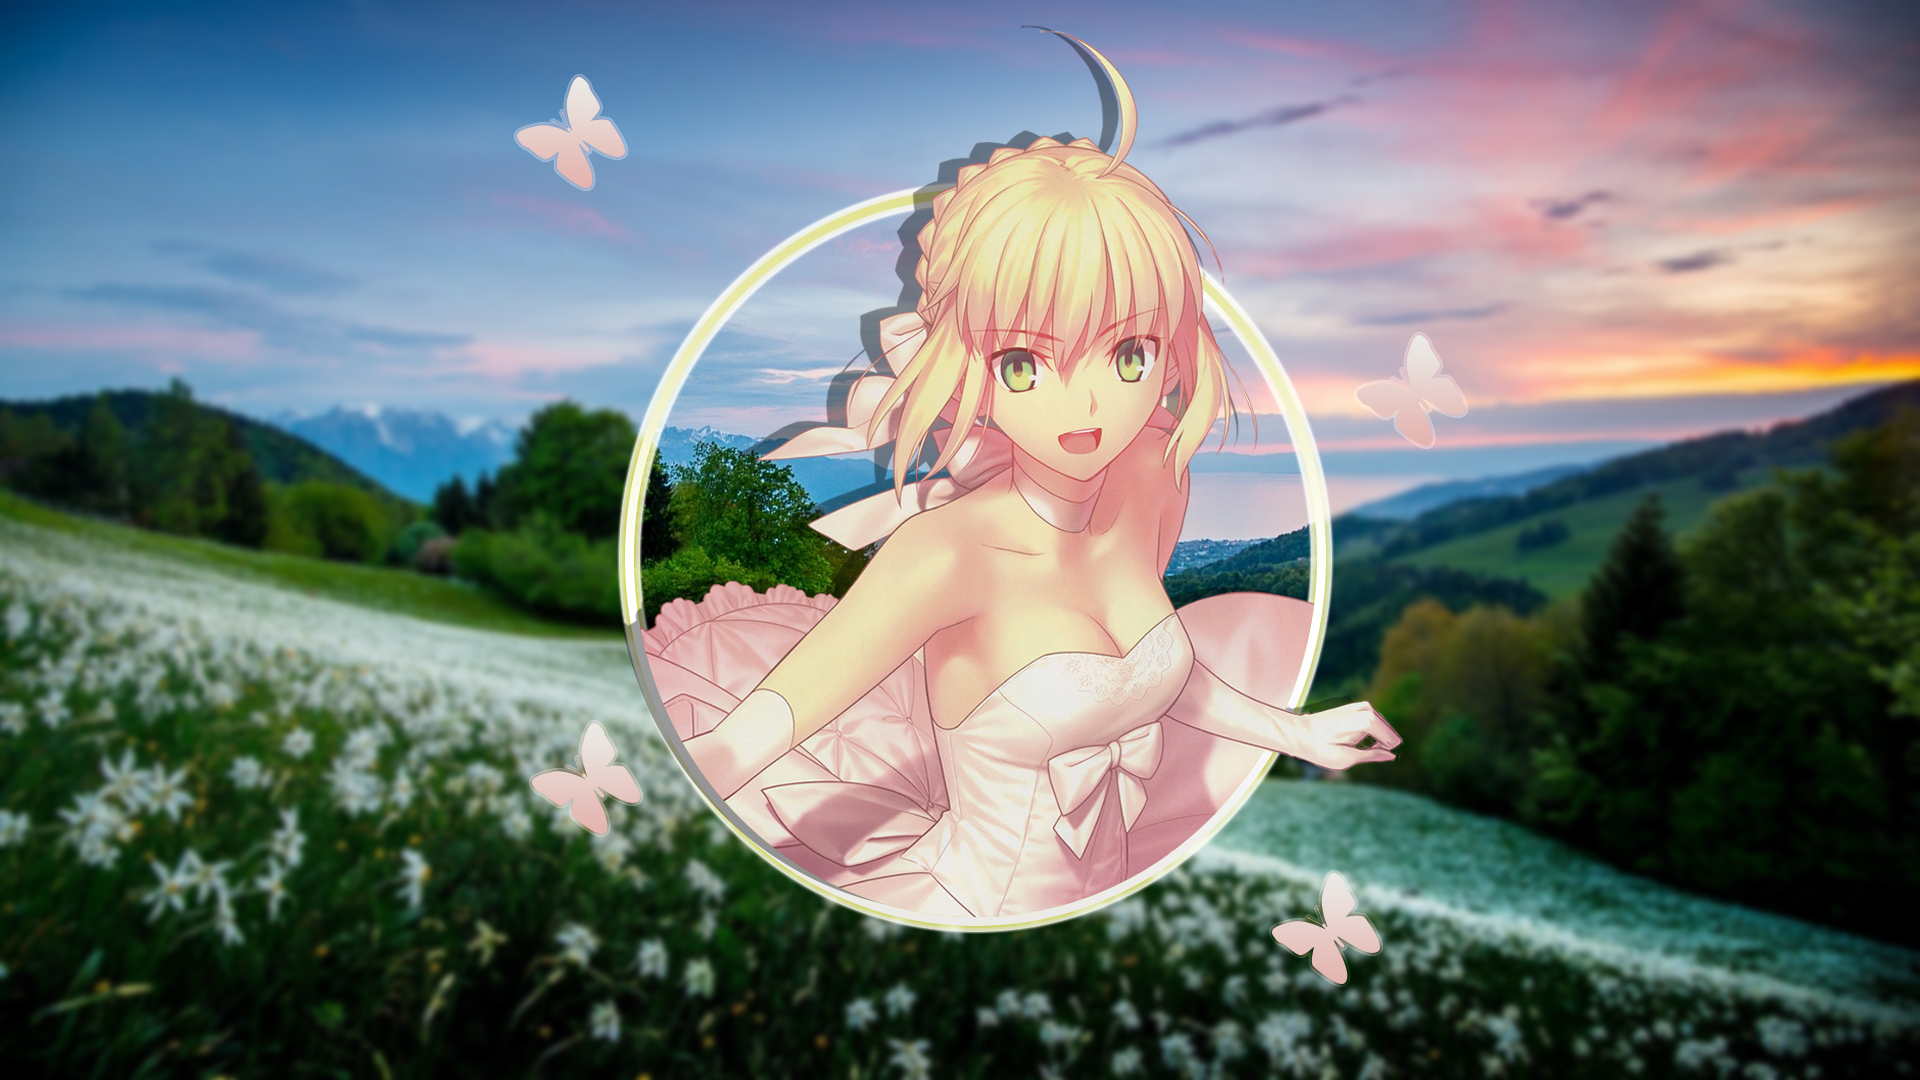 Fate Series Flowers Picture In Picture Anime Girls Saber Saber Fate Grand Order 1920x1080